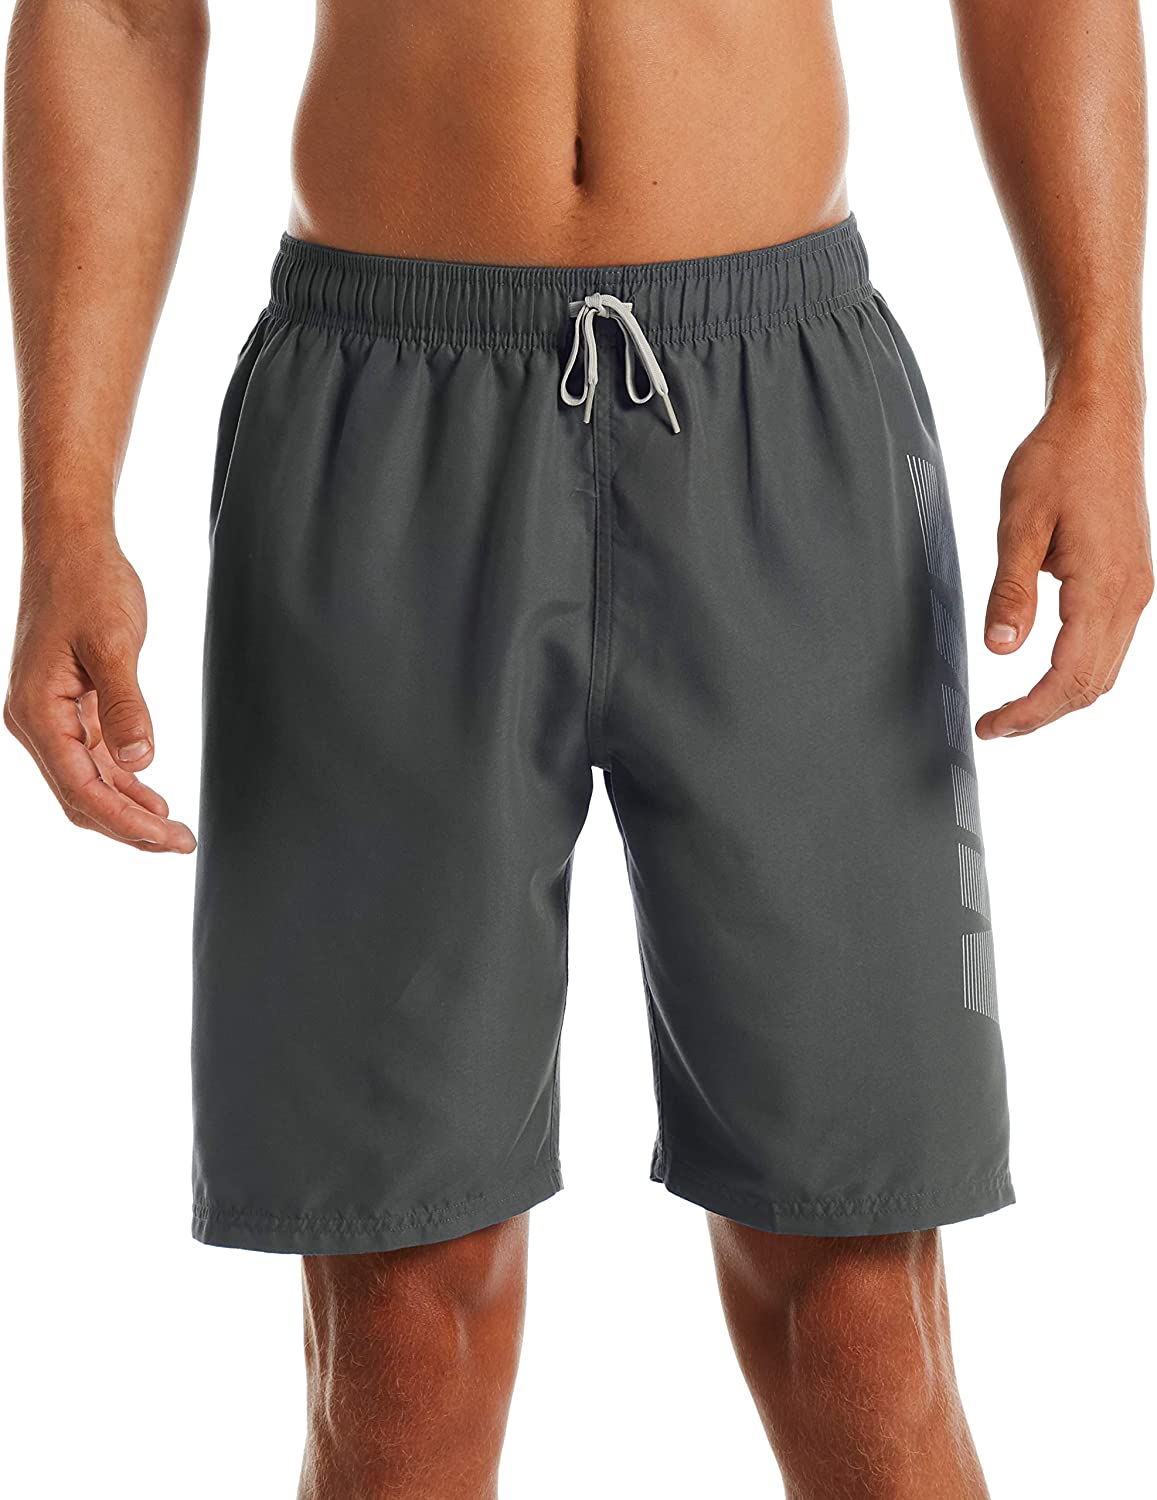 Men's Nike Logo Volley Short Swim Trunk in Iron Grey color from the front